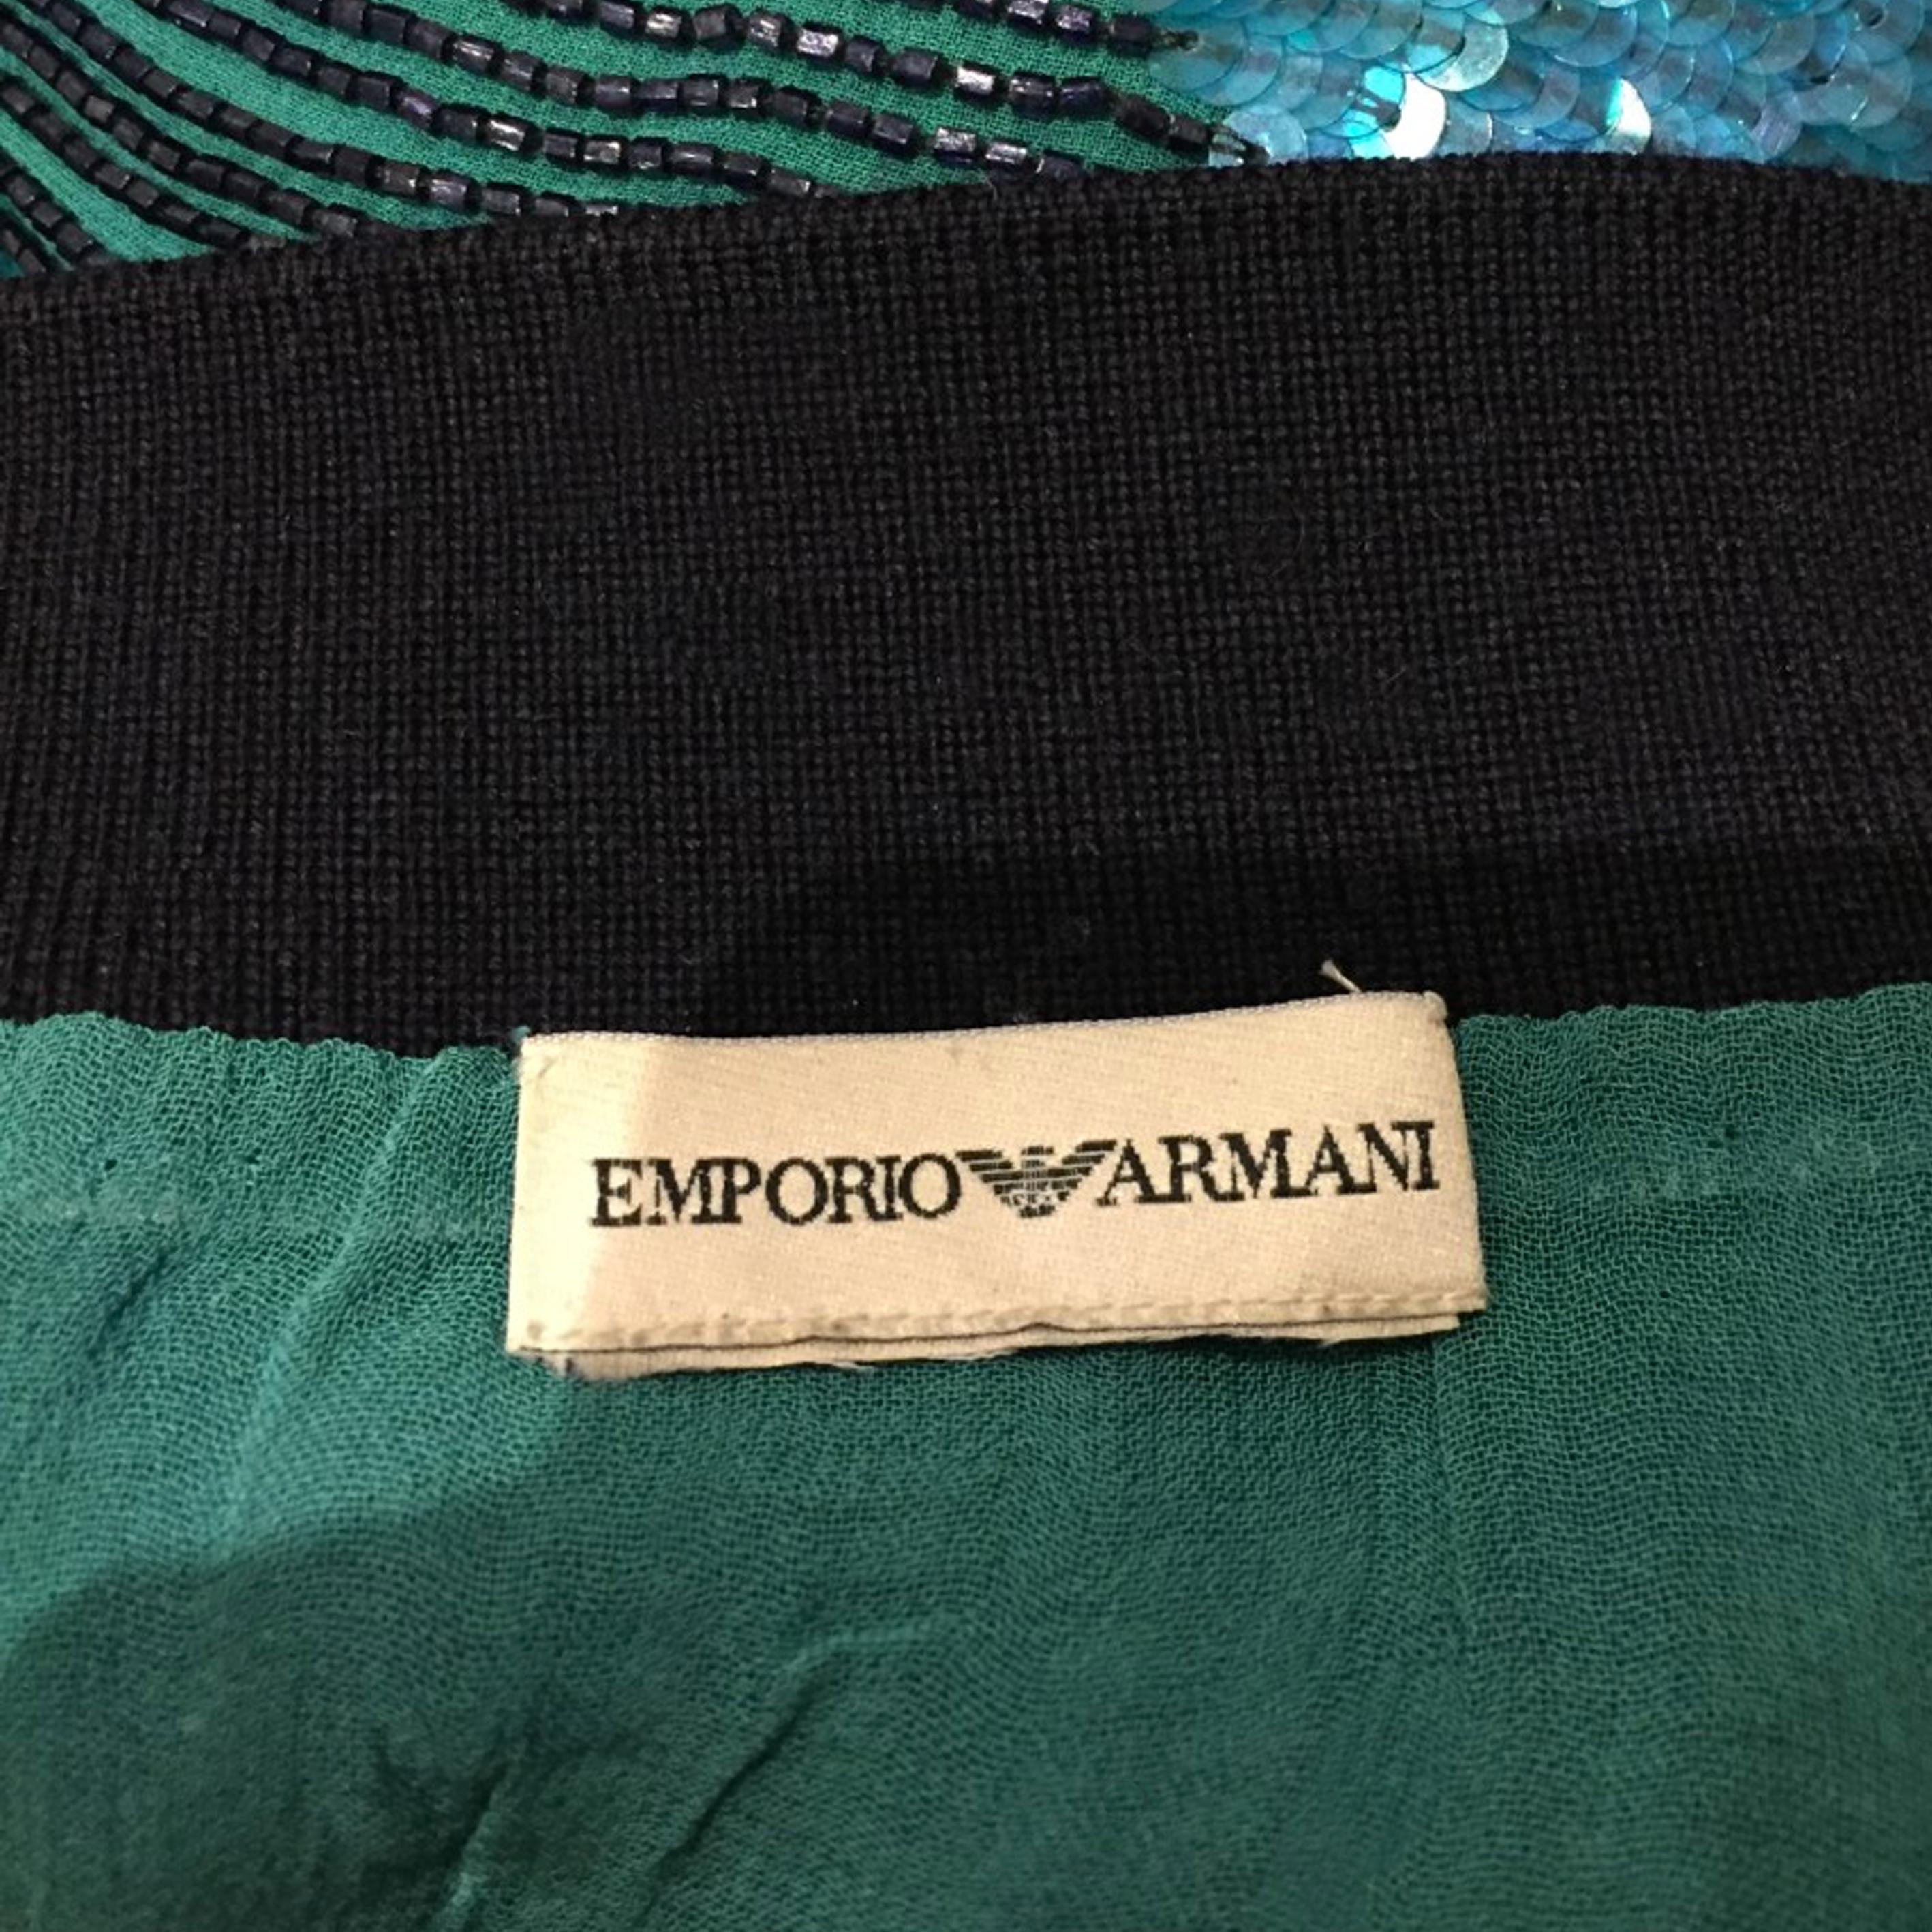 EMPORIO ARMANI FW2002 Turquoise sequins silk top with black pearls 3